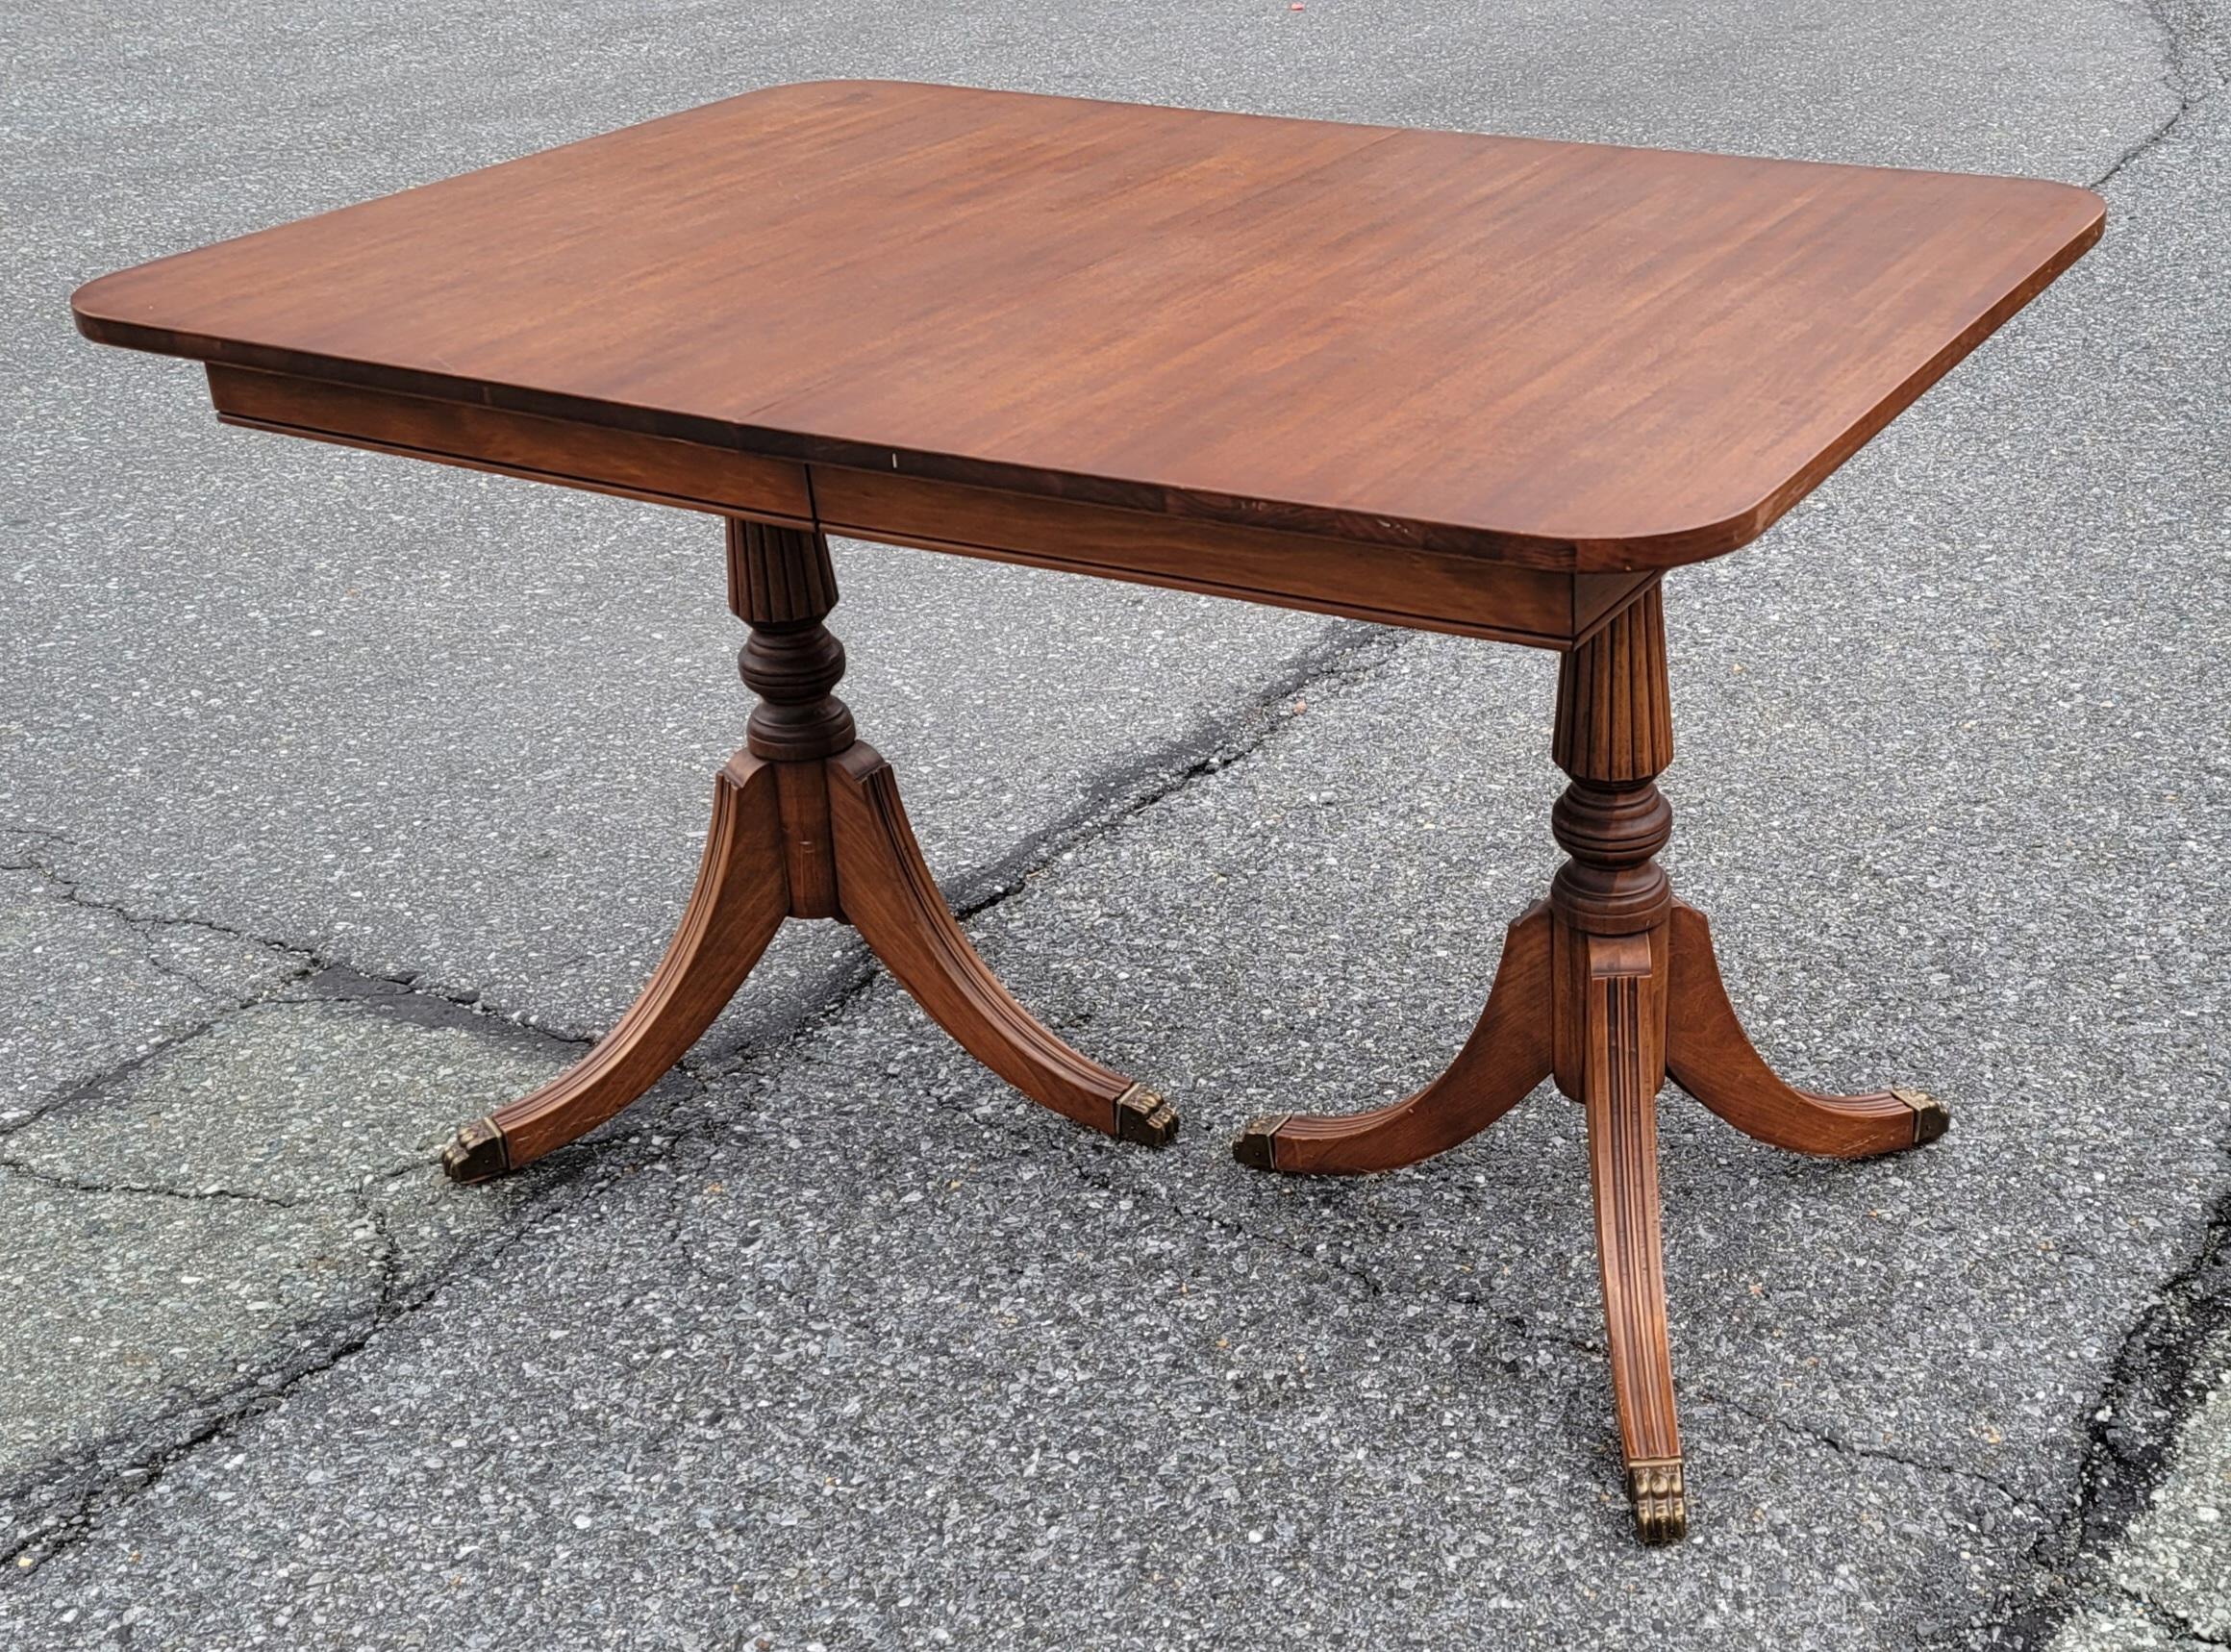 1930s Newly Refinished George III style Double Pedestal Mahogany Extension Dining Table. Excellent condition. Totally refinished to the pedestals and legs with hand-rub finish appearance. Measures 59.5